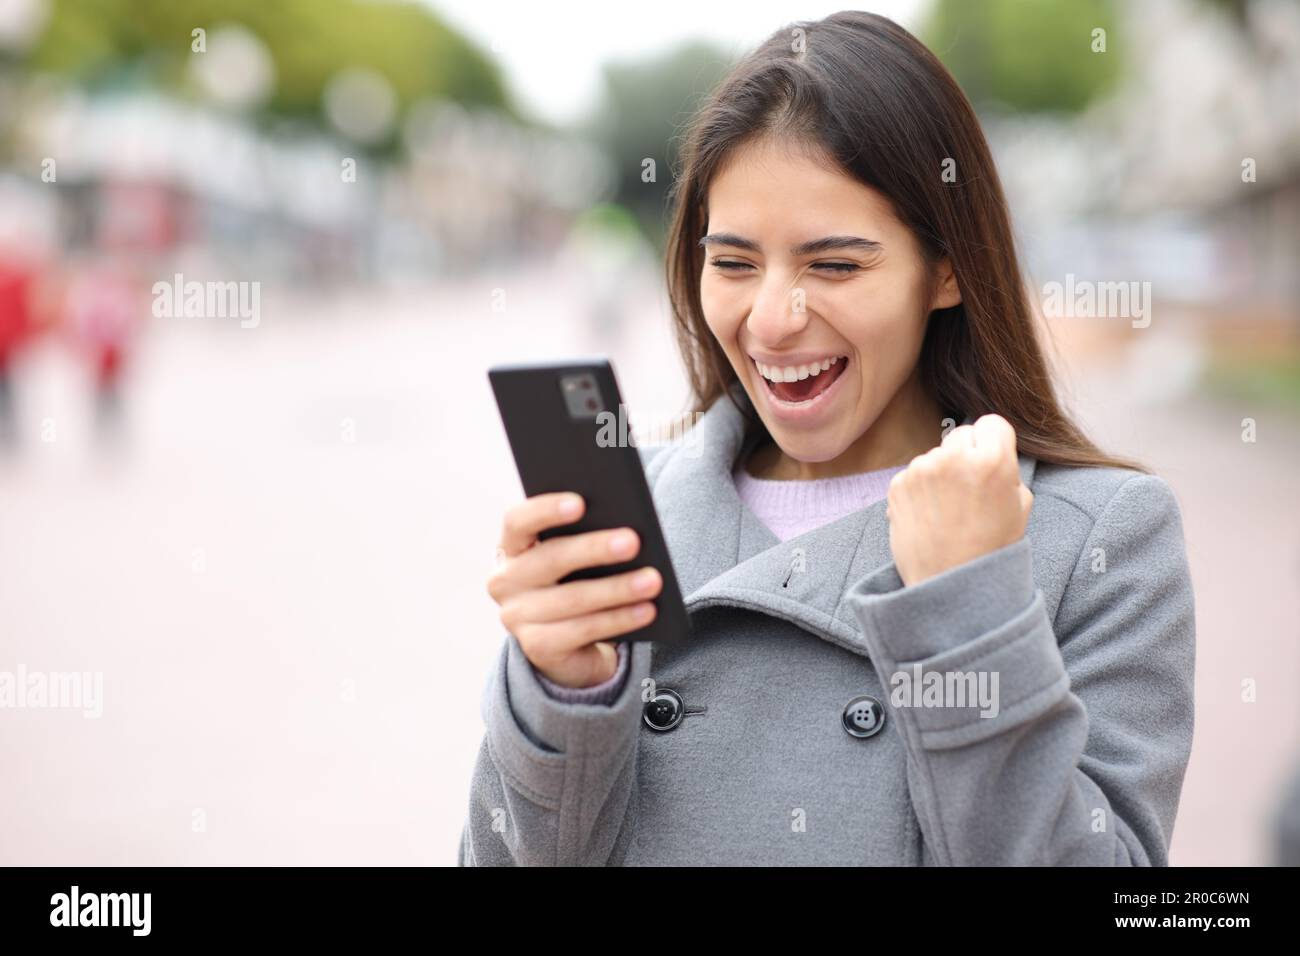 Excited woman checking content on phone in the street Stock Photo